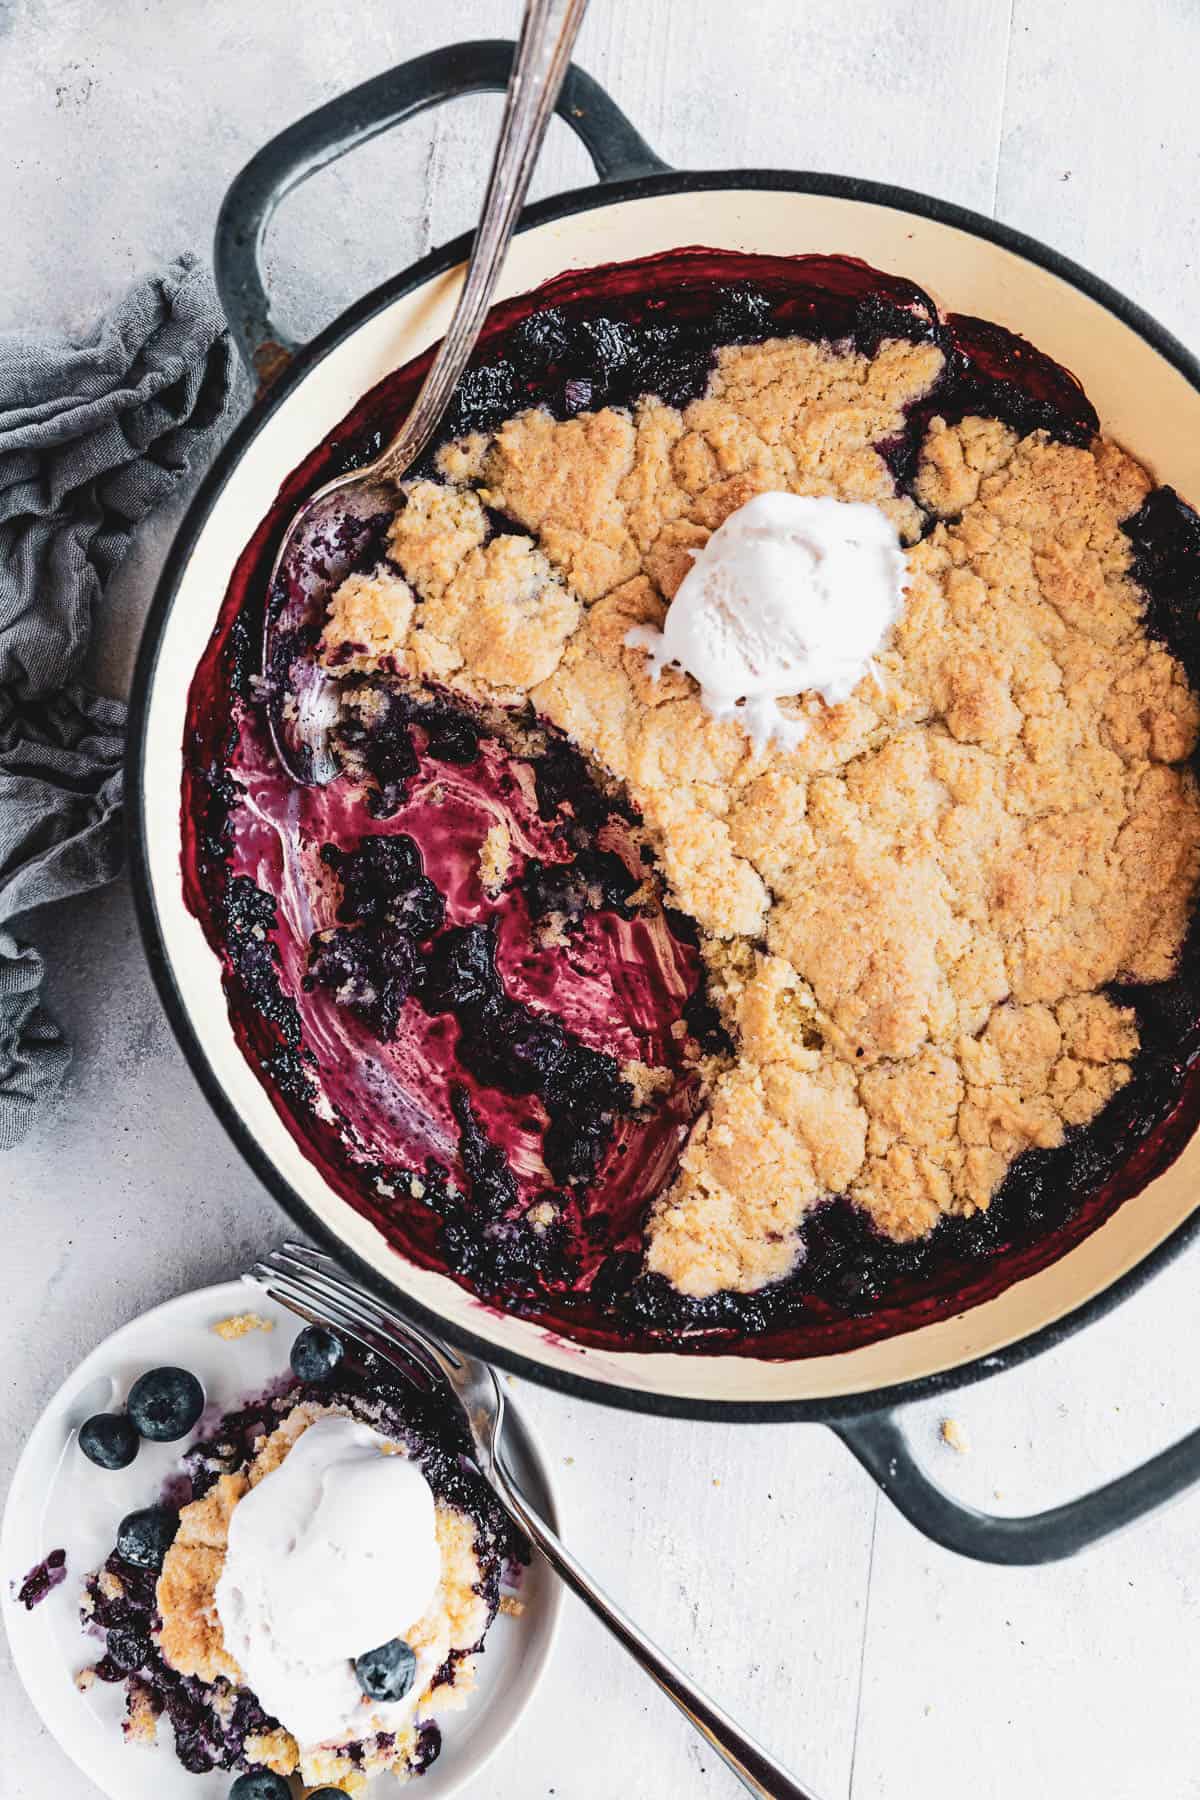 Blueberry Rhubarb Cobbler in a baking dish